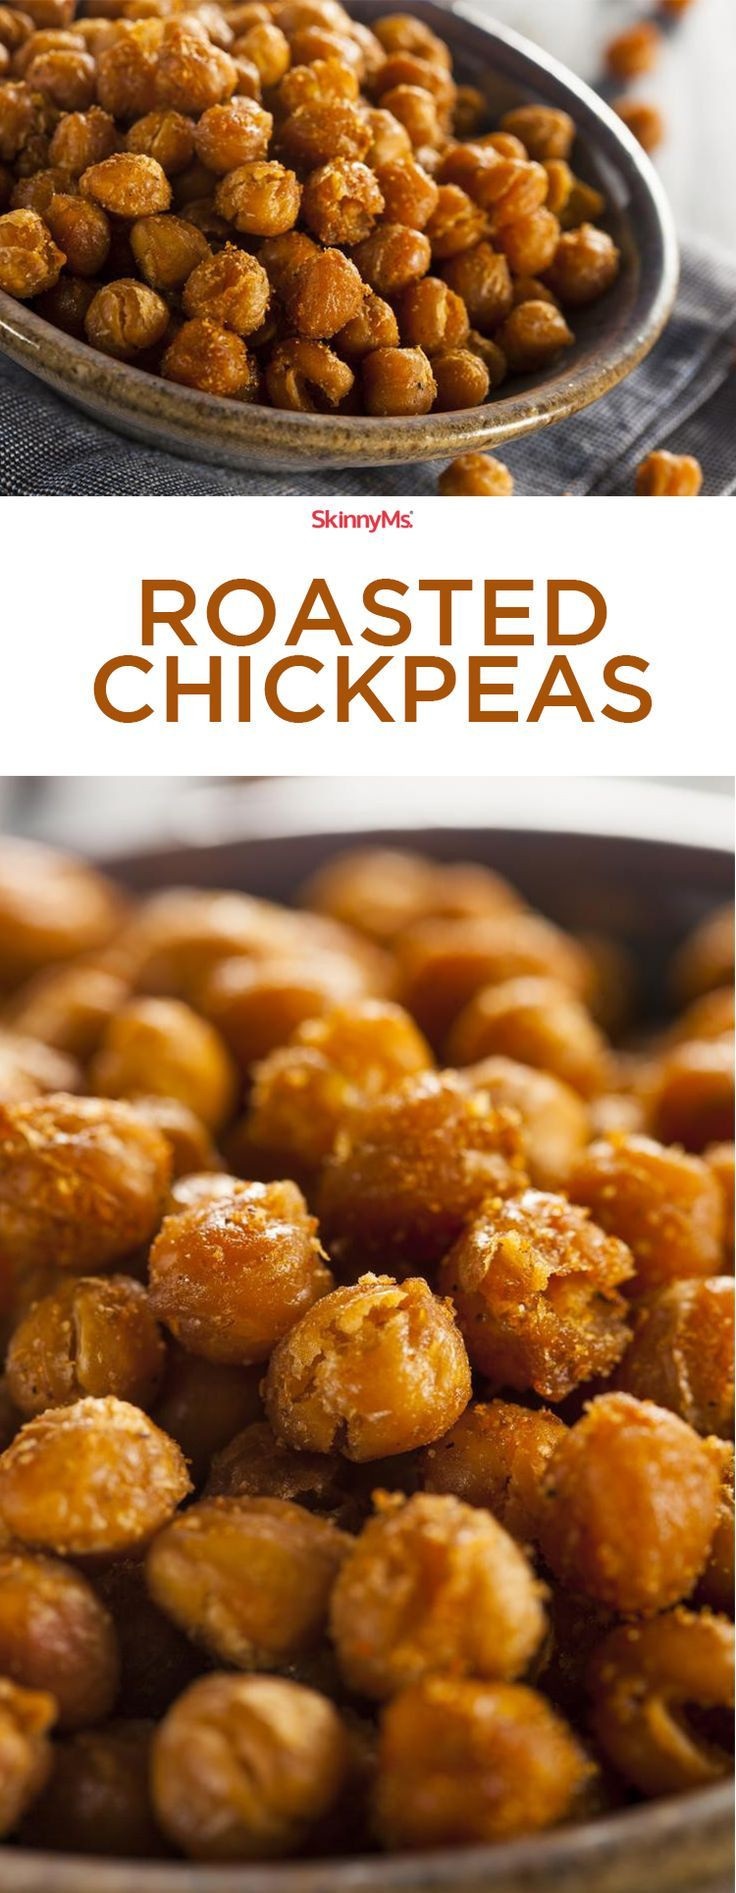 Baked Chickpea Recipes
 Chickpea recipes Roasted chickpeas recipe and Chickpeas